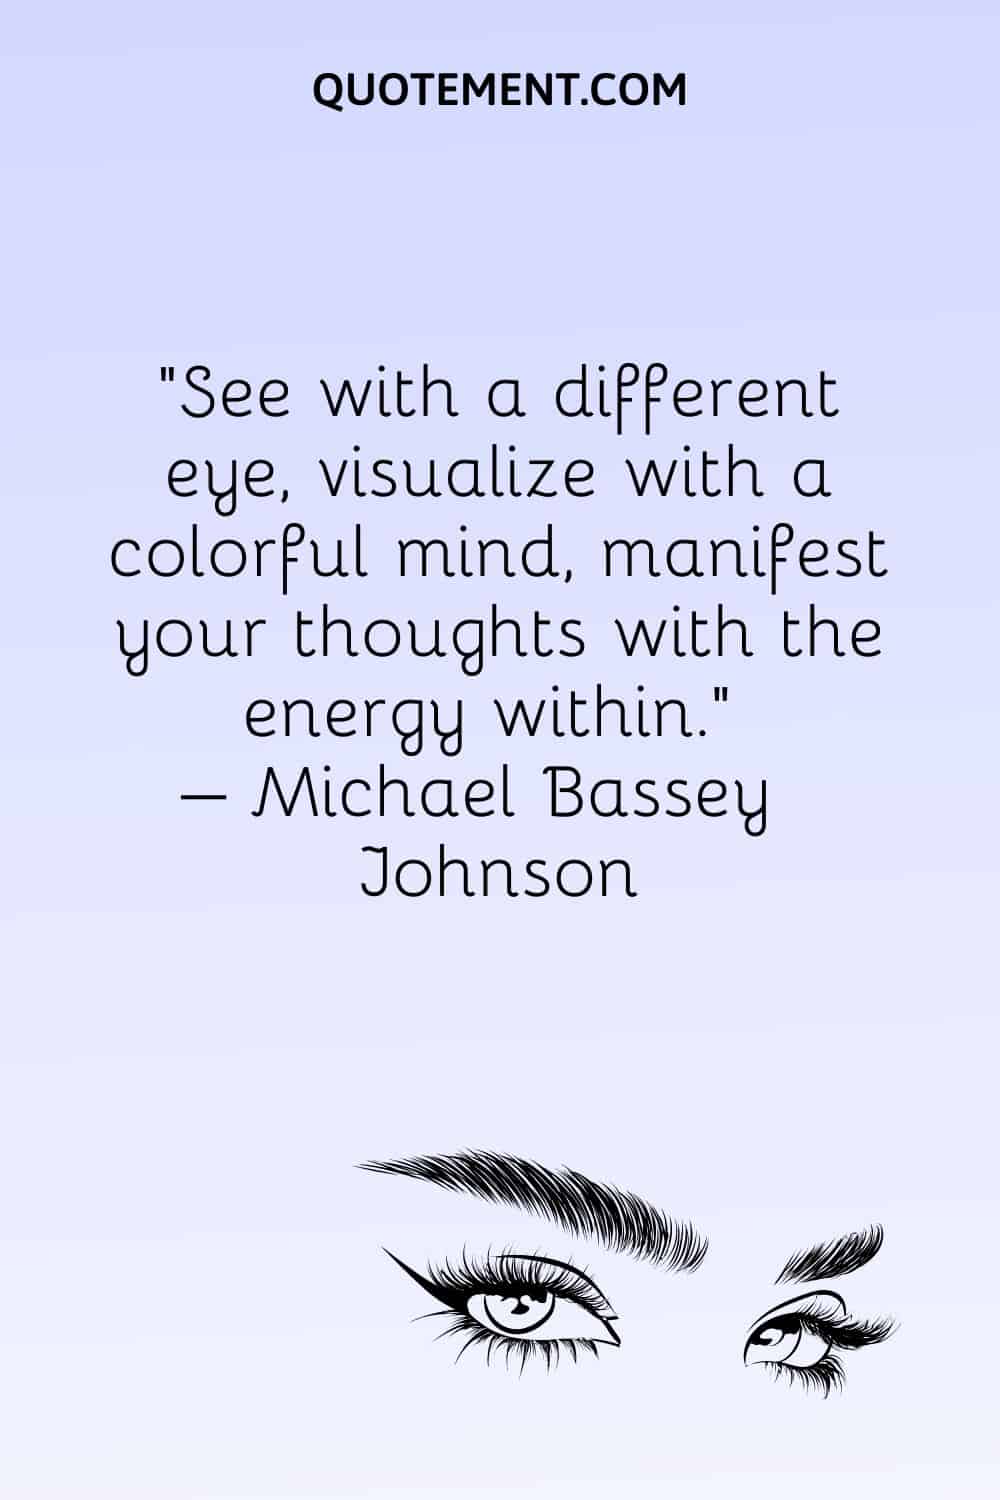 See with a different eye, visualize with a colorful mind, manifest your thoughts with the energy within